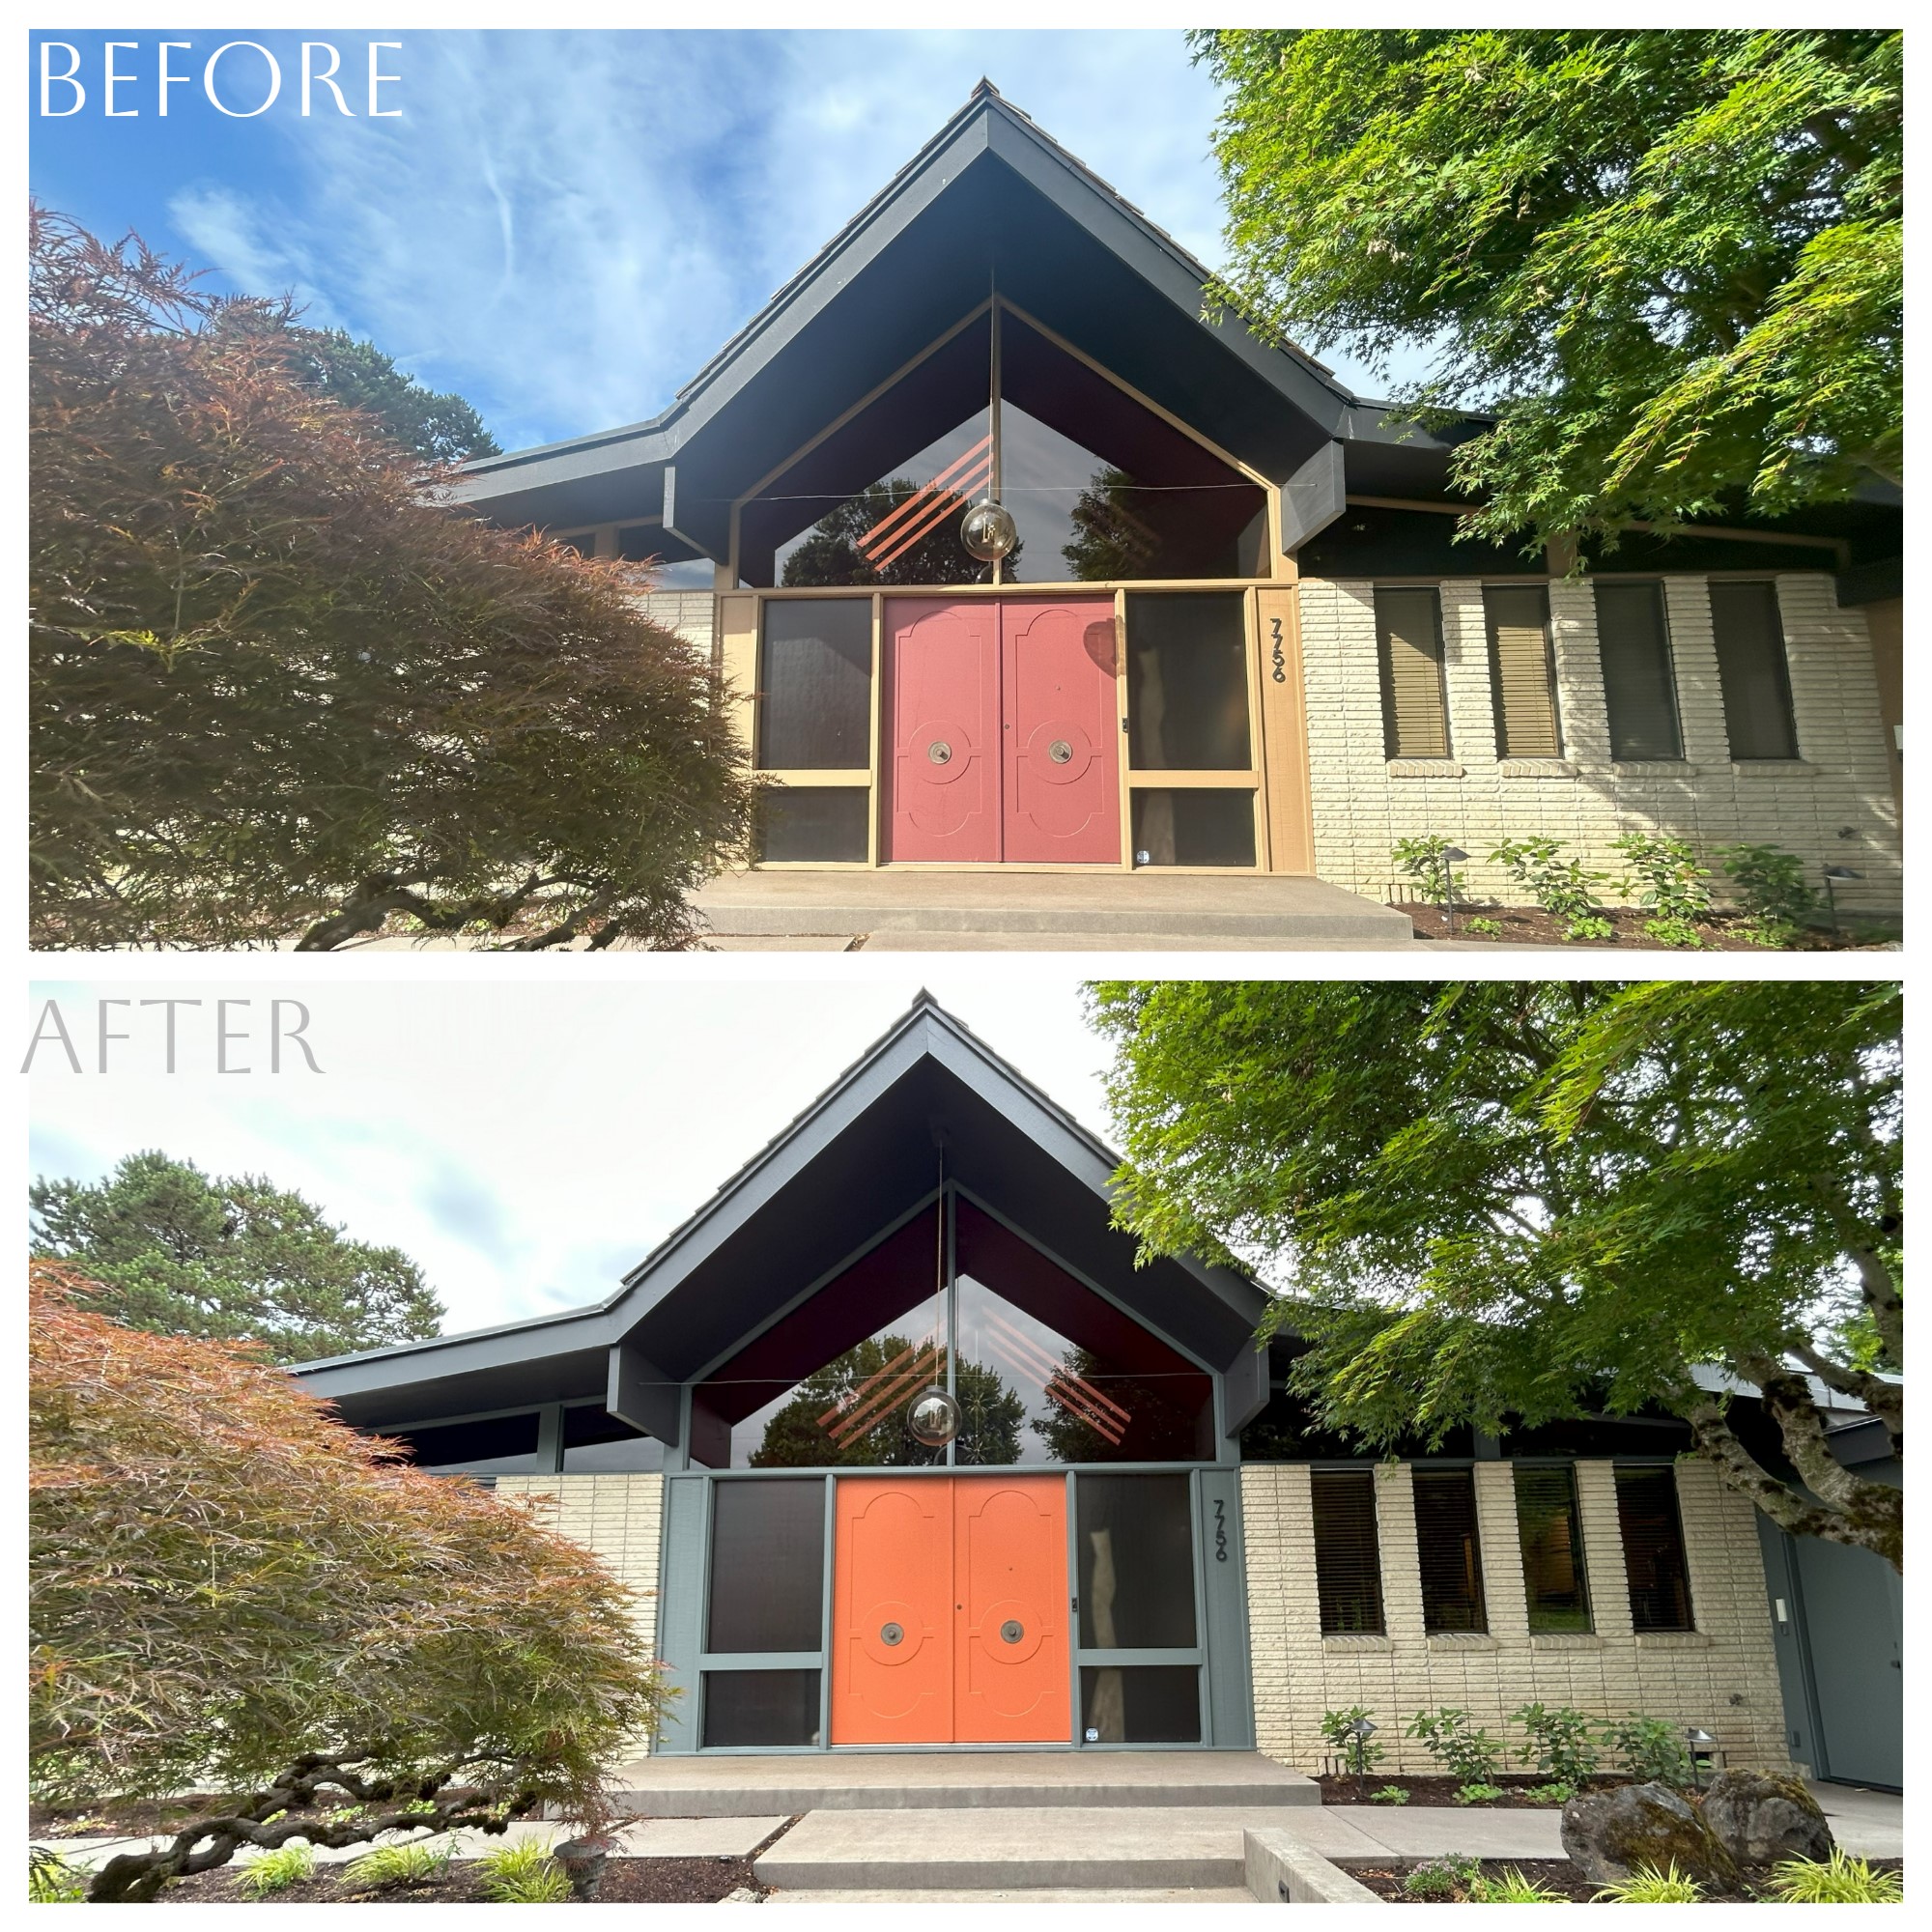 Before and after house painting photos